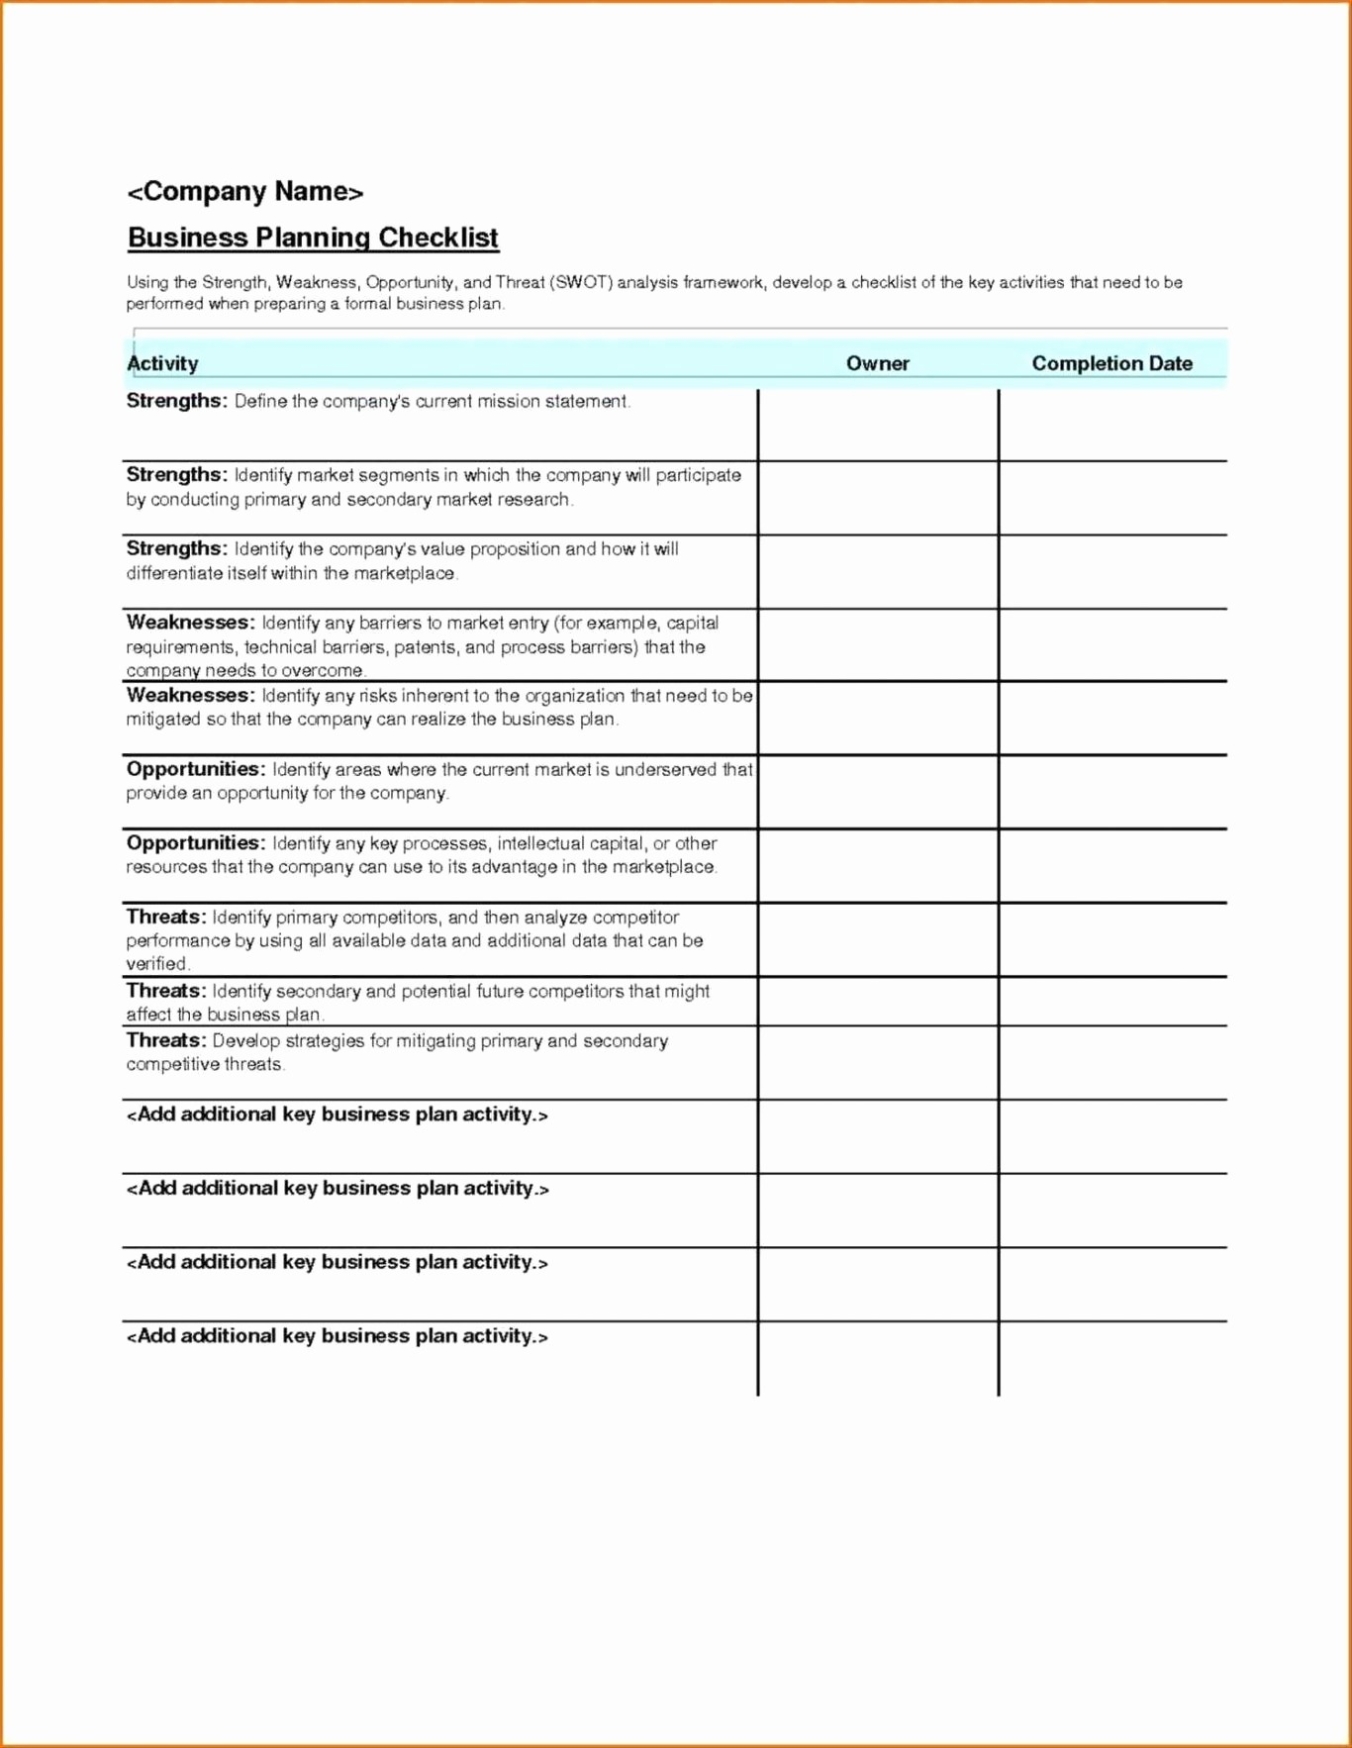 Small Business Bookkeeping Excel Template New Free Accounting To With Regard To Bookkeeping Templates For Small Business Excel